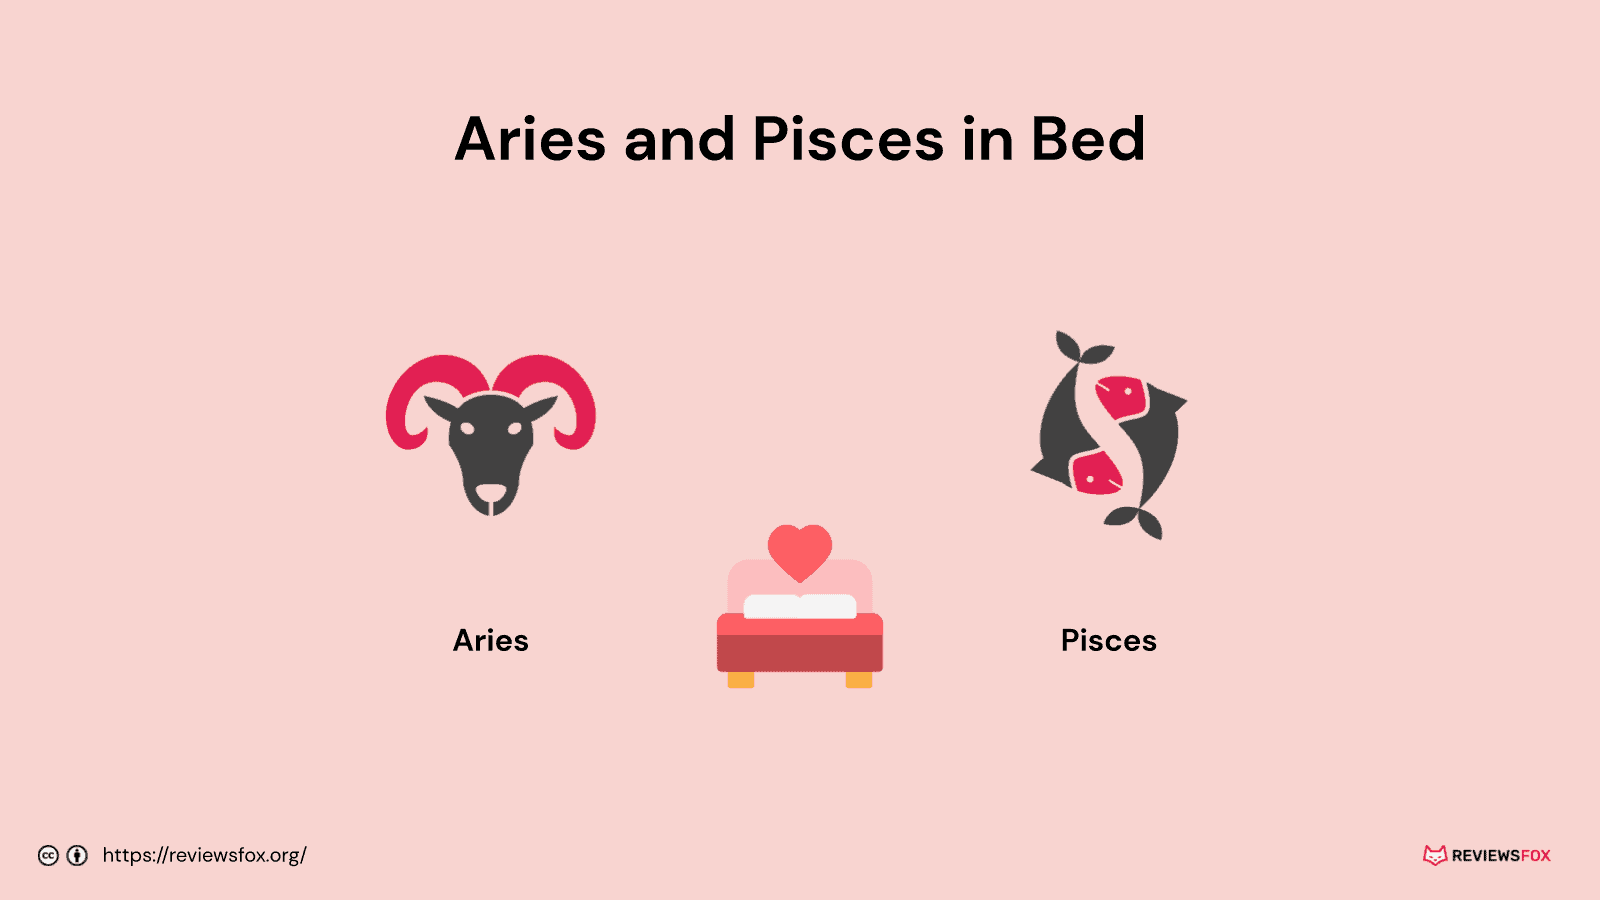 Aries and Pisces in bed